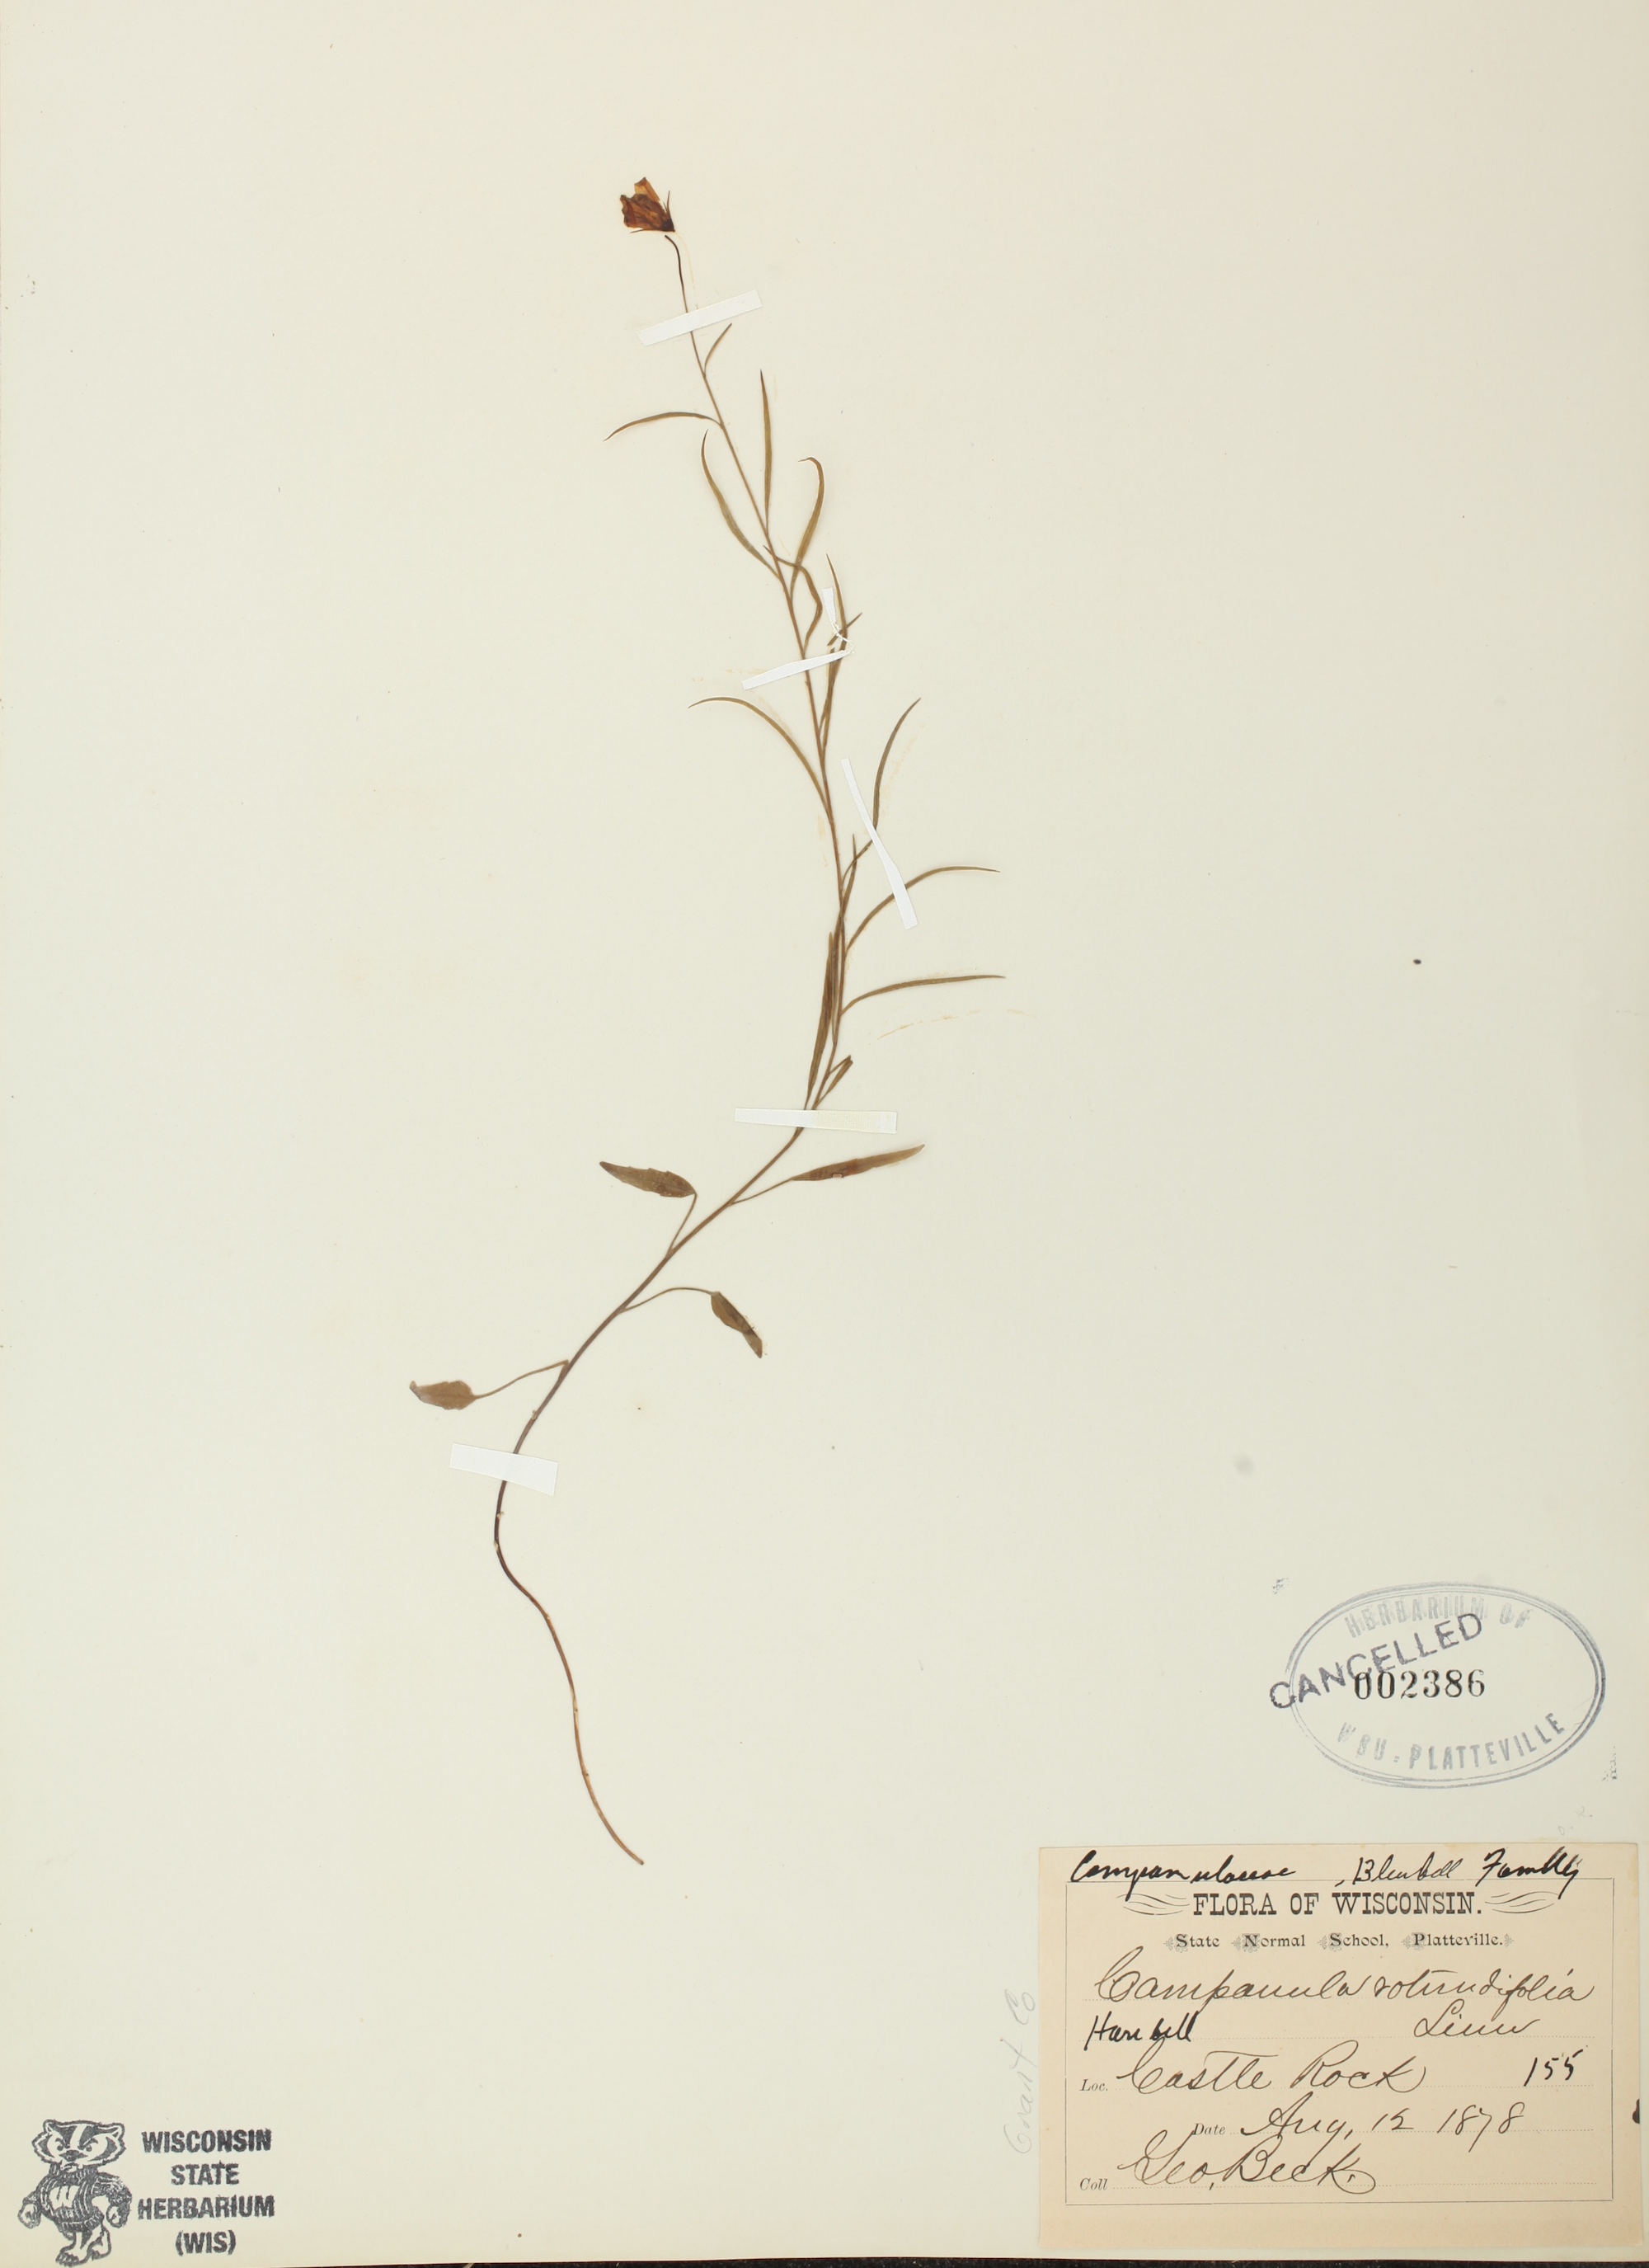 Harebell (Campanula rotundifolia ) specimen collected by Castle Rock on August 12, 1878.